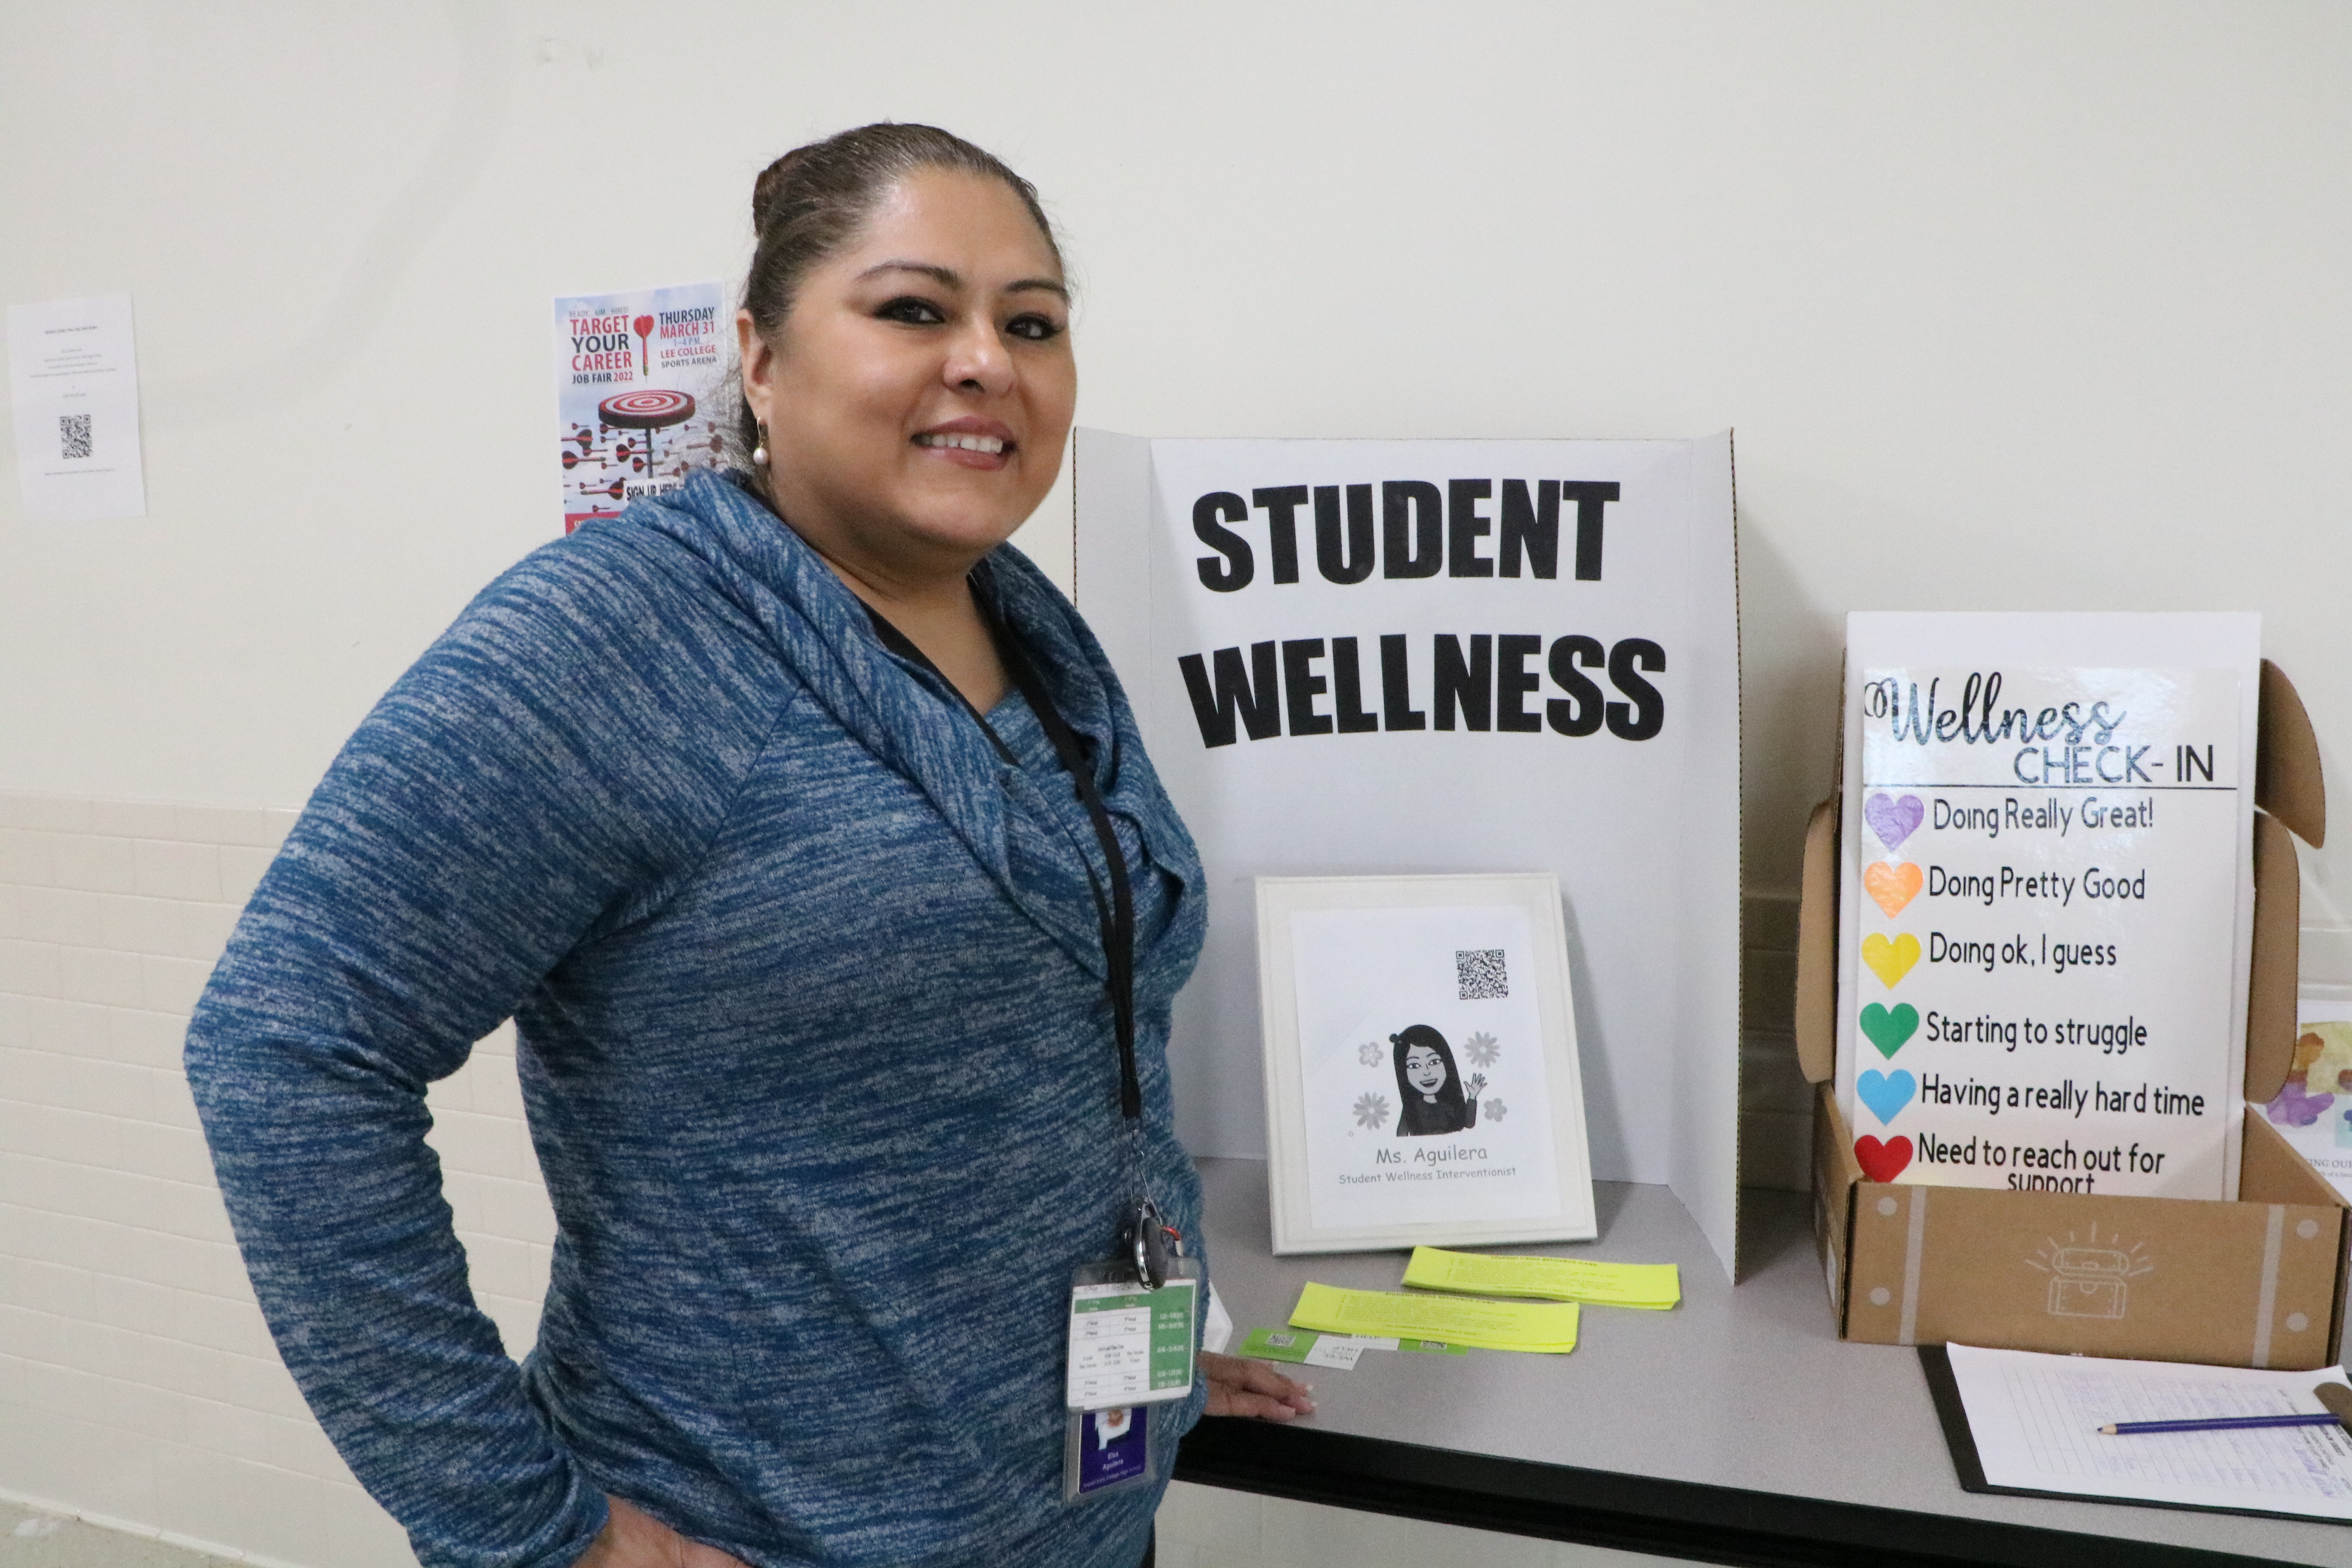 social worker elsa stands in front of resources for students